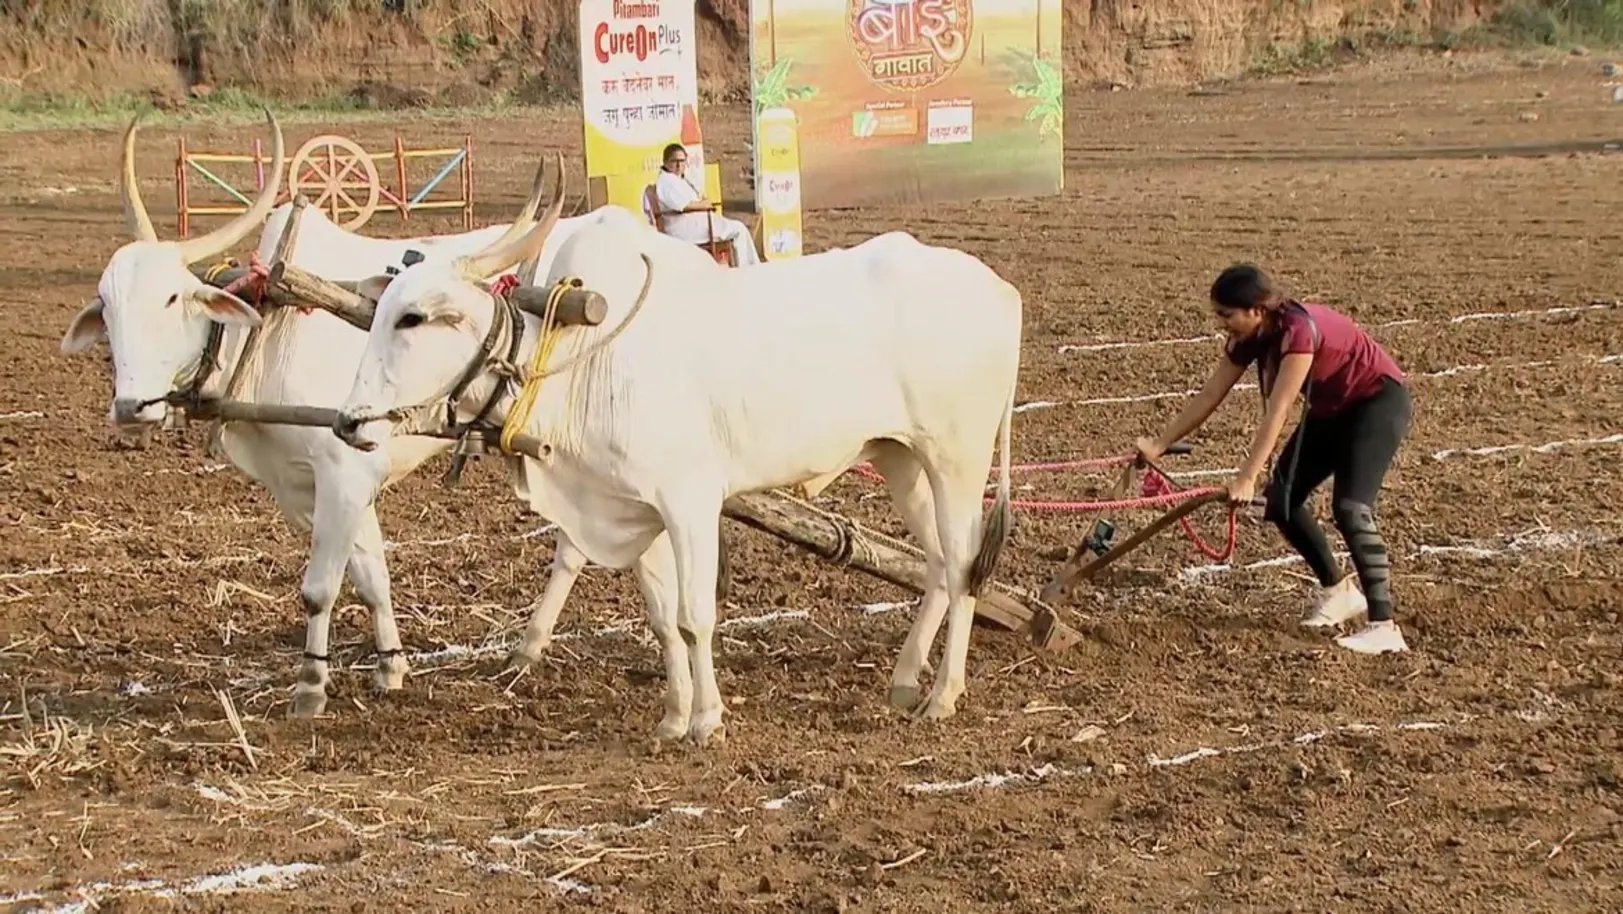 The Contestants Complete the Ploughing Task 